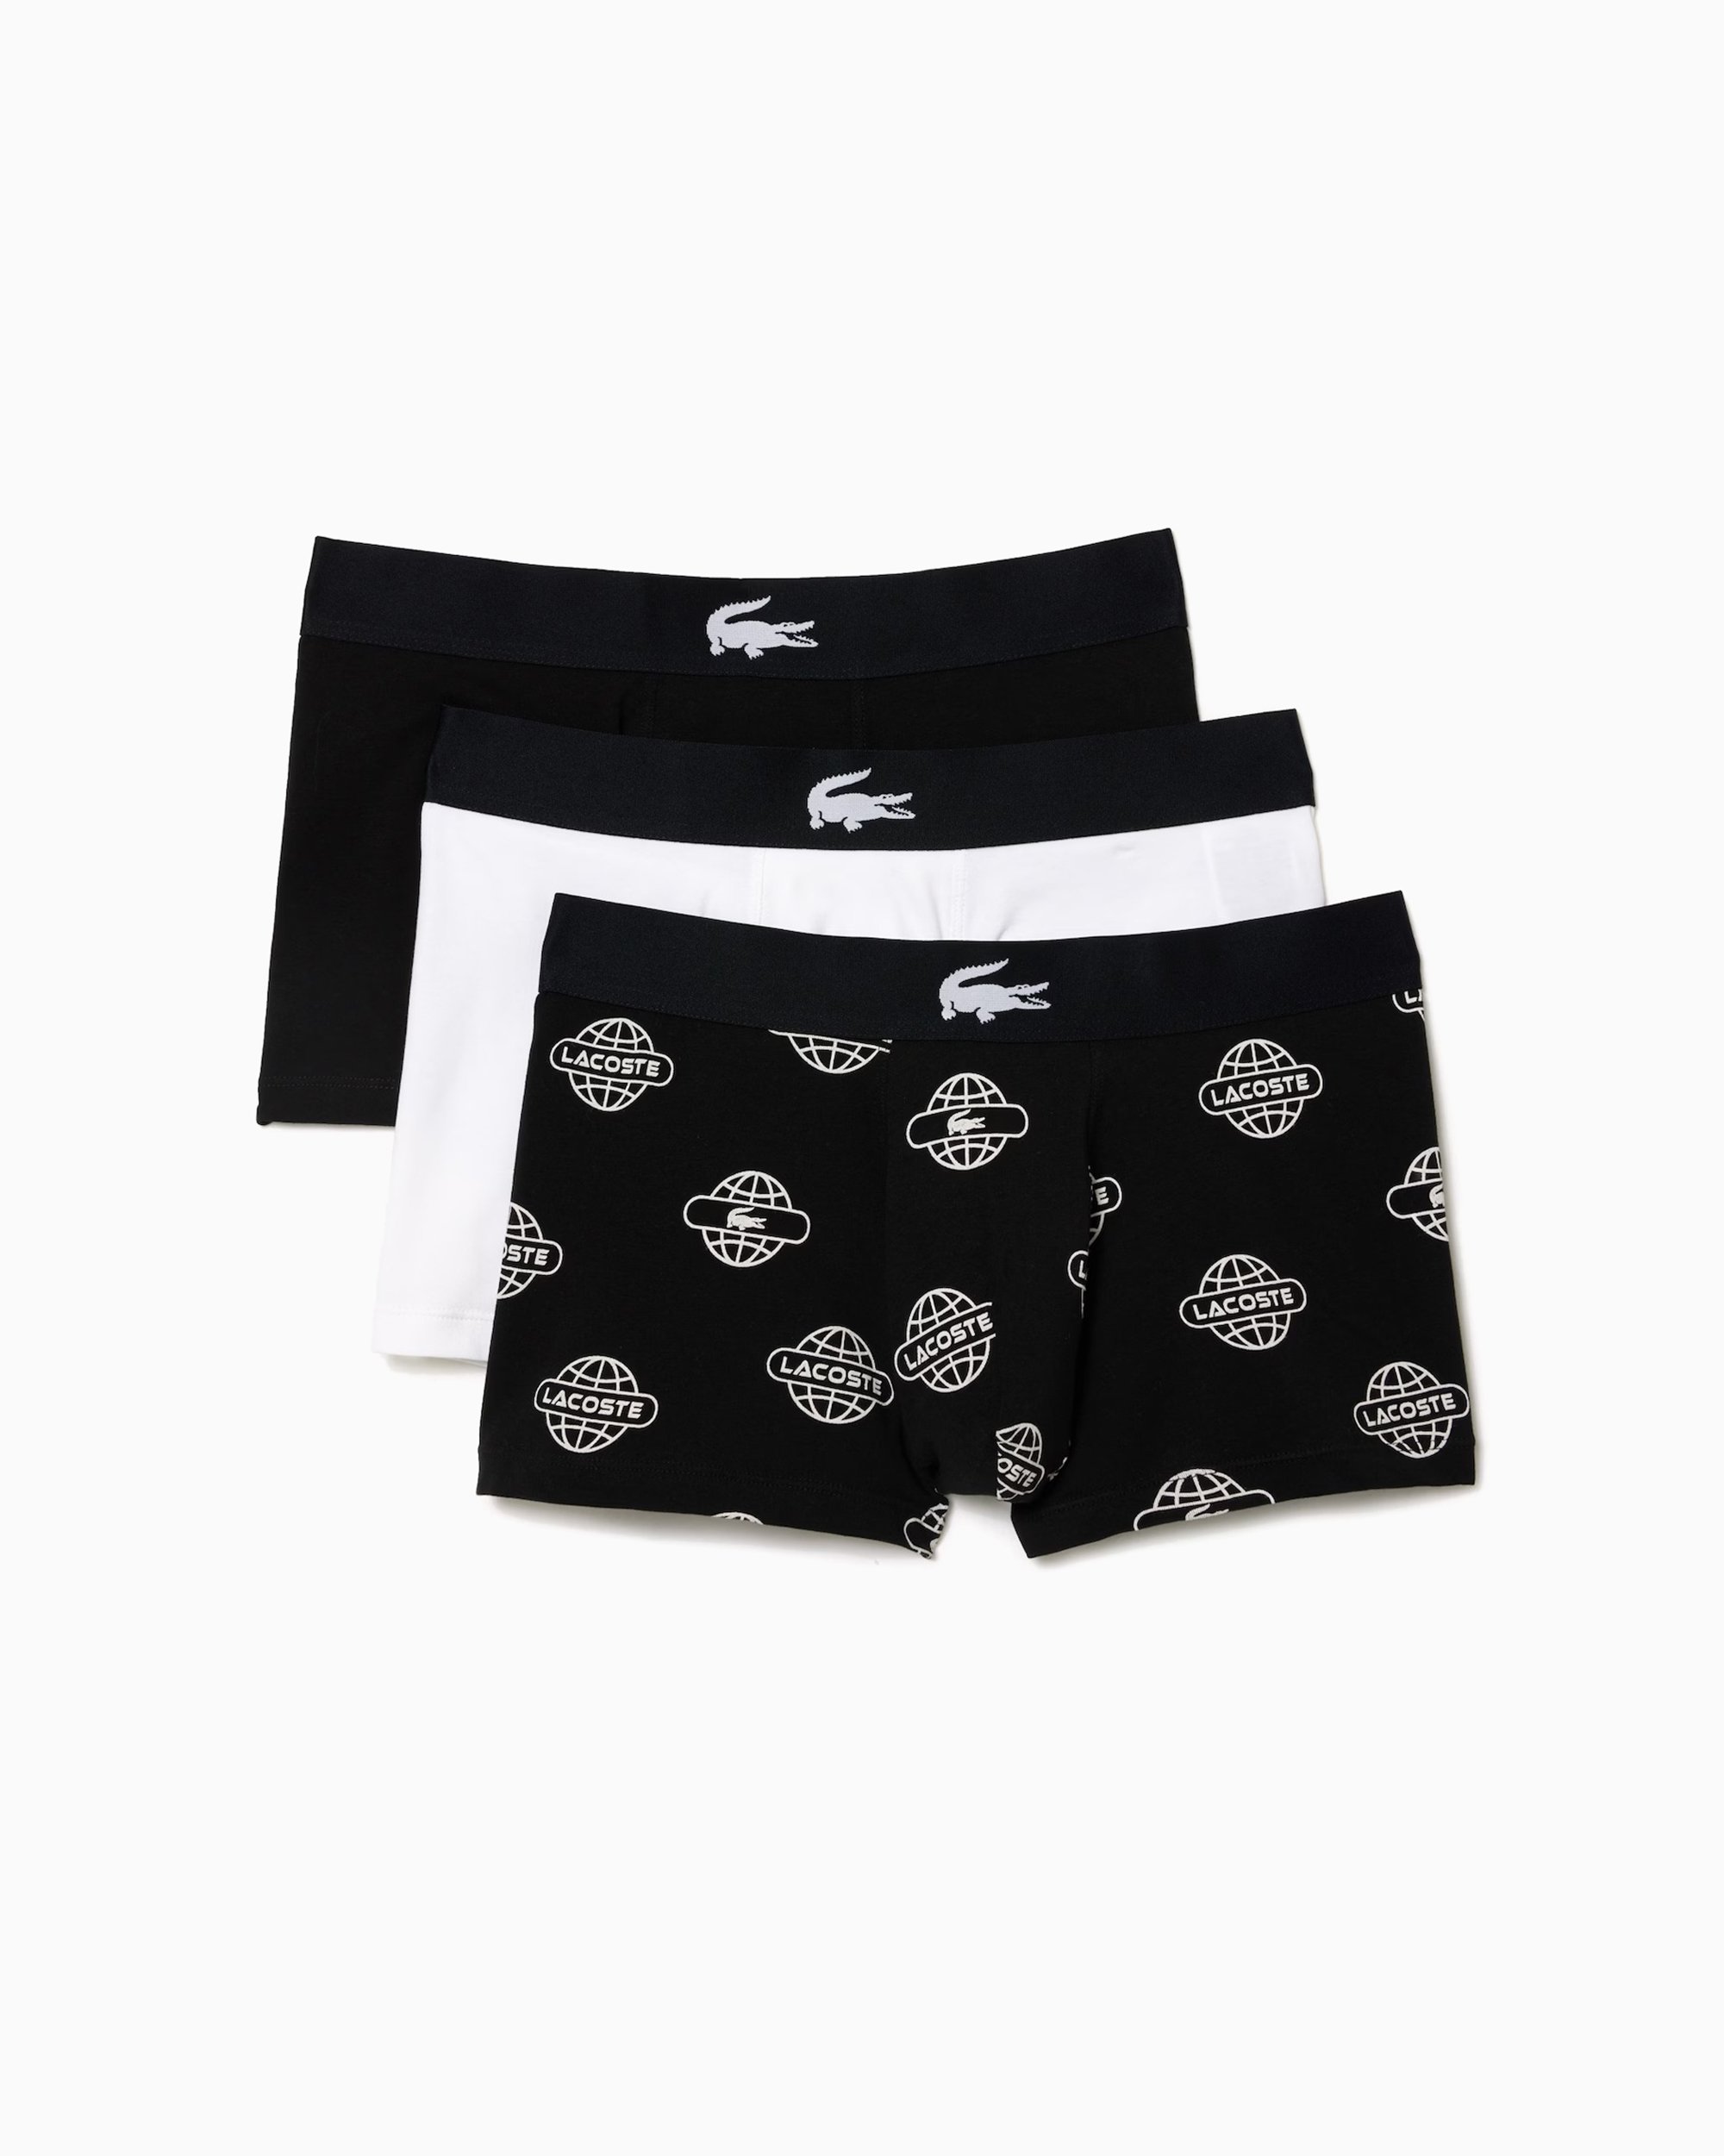 Boxer shorts LACOSTE 3-Pack Casual Cotton Stretch Boxers Black